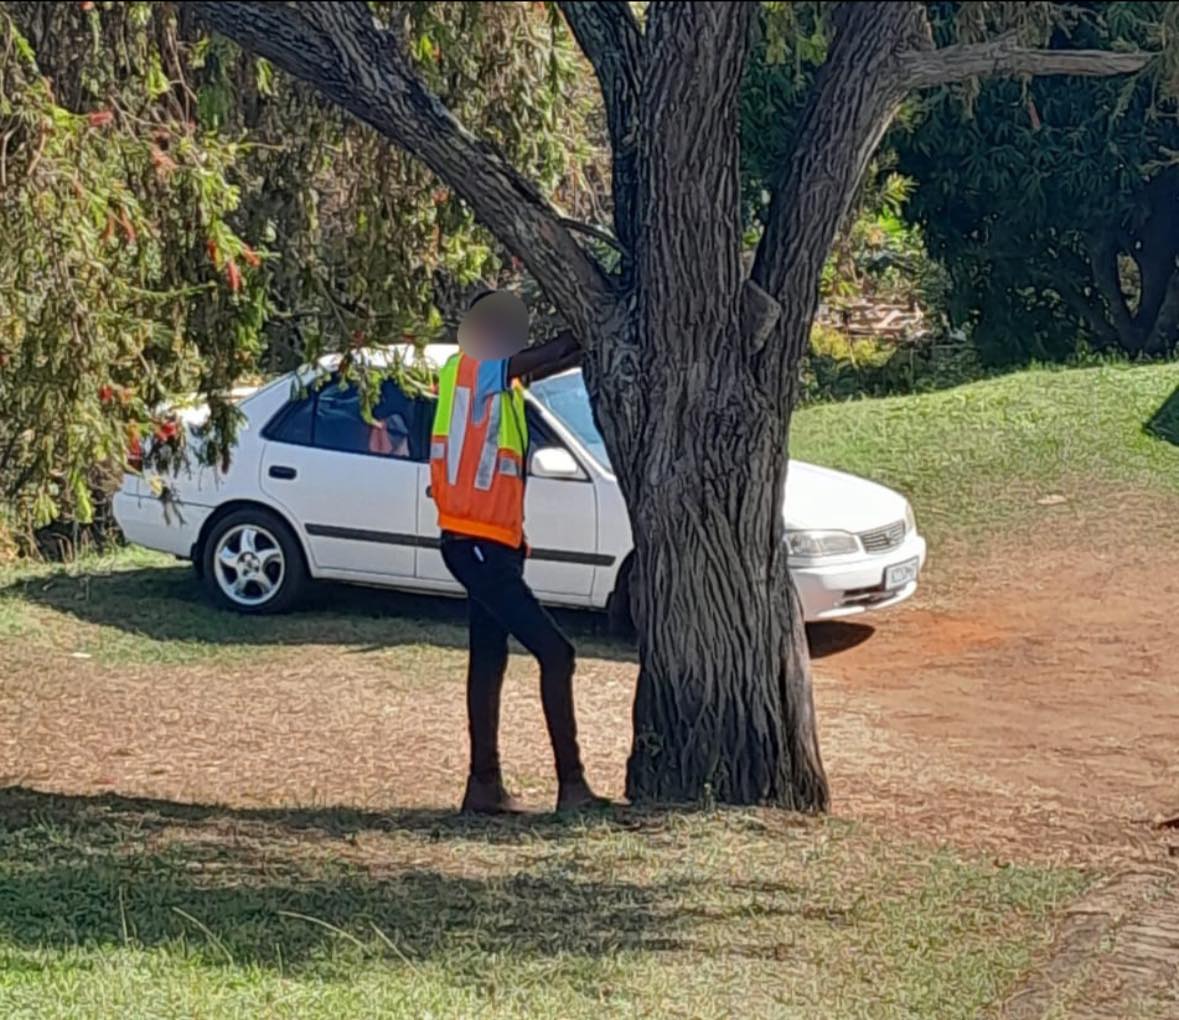 Man detained for restraining municipal worker to a tree in Everest Heights